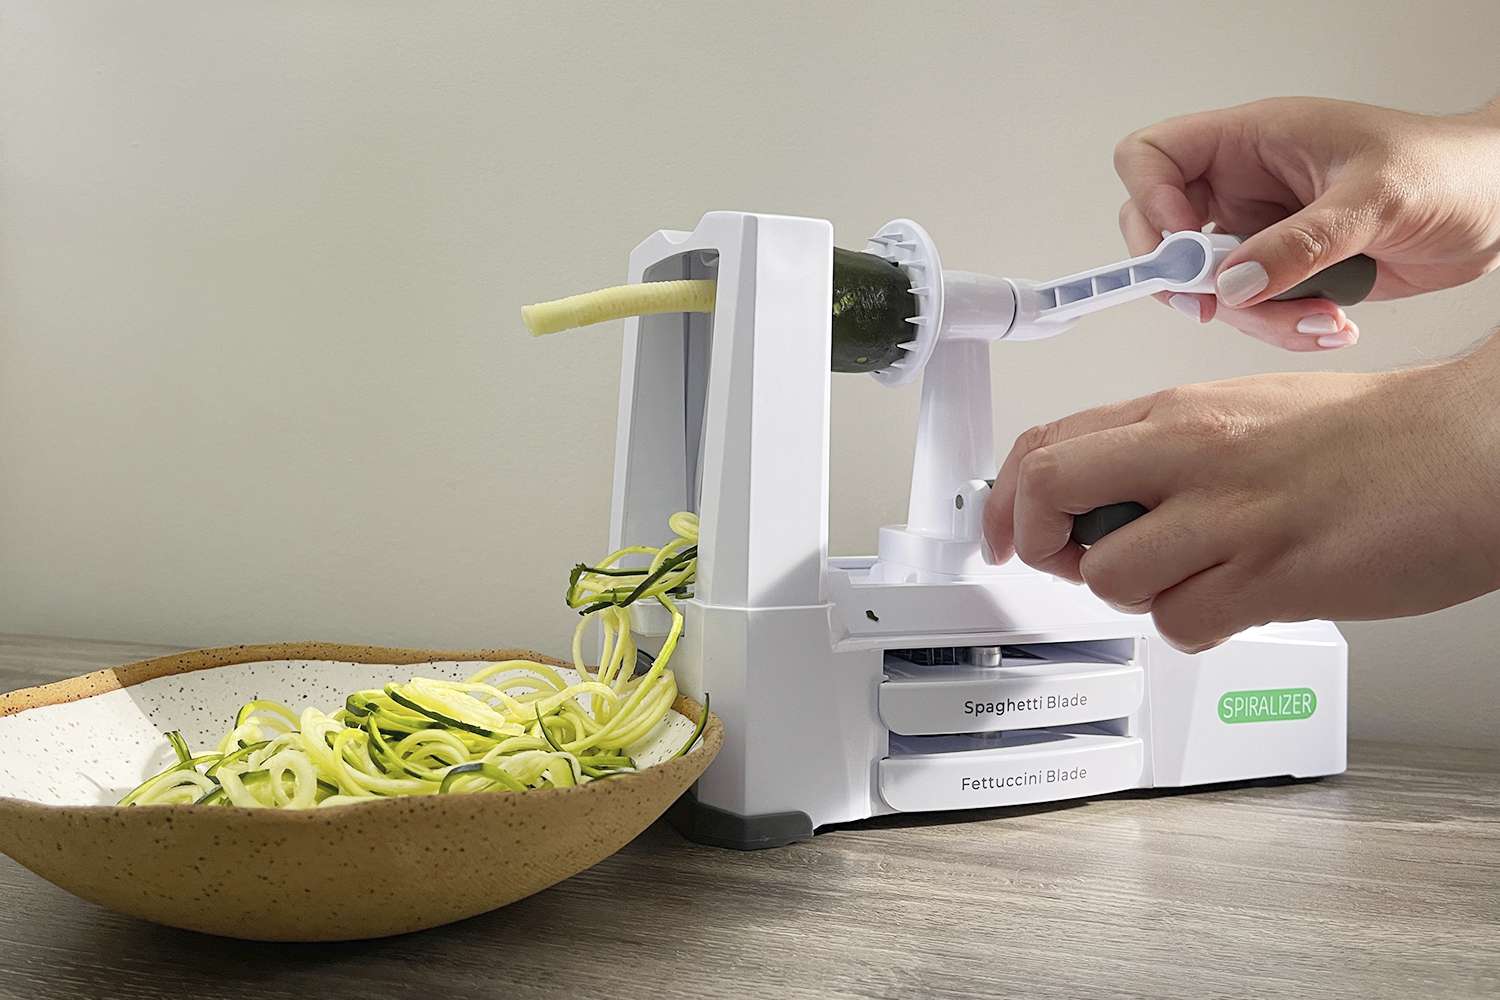 Spiralizer Review: The Best Kitchen Tool for Healthy Meal Prep